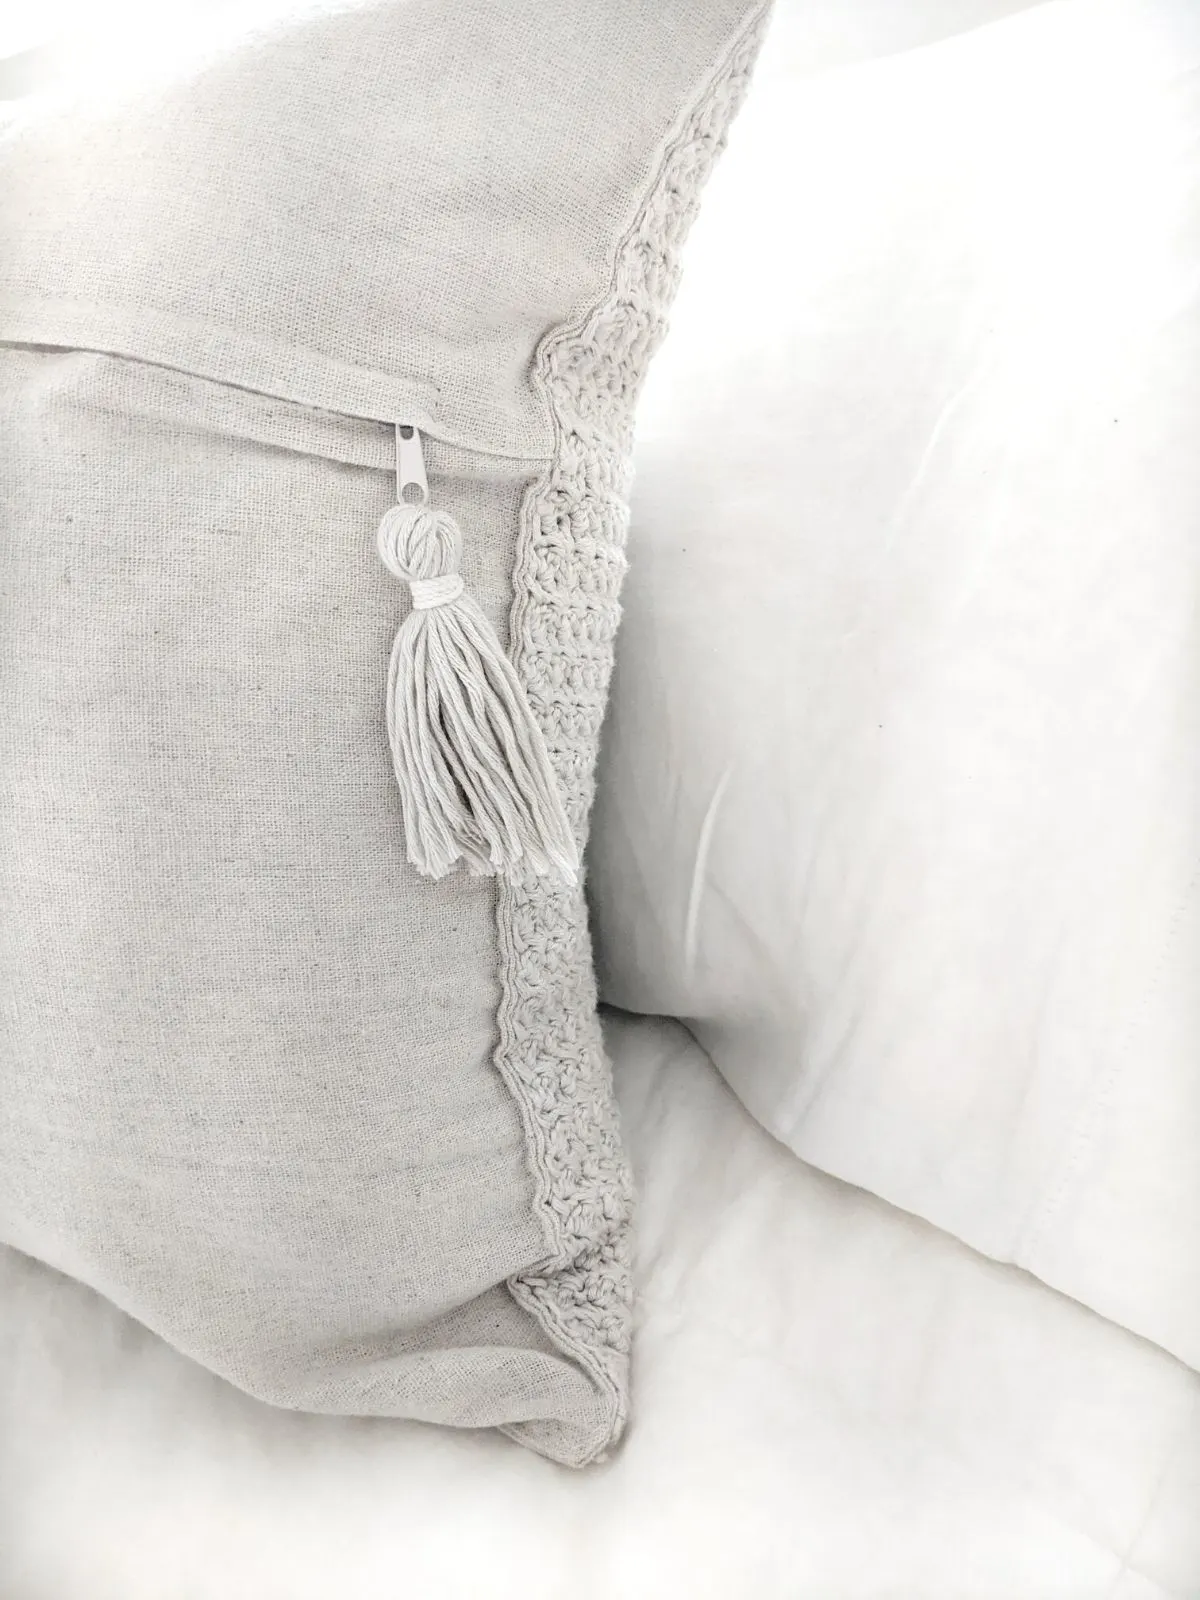 The back of a crochet pillow cover with a hanginig tassel. 